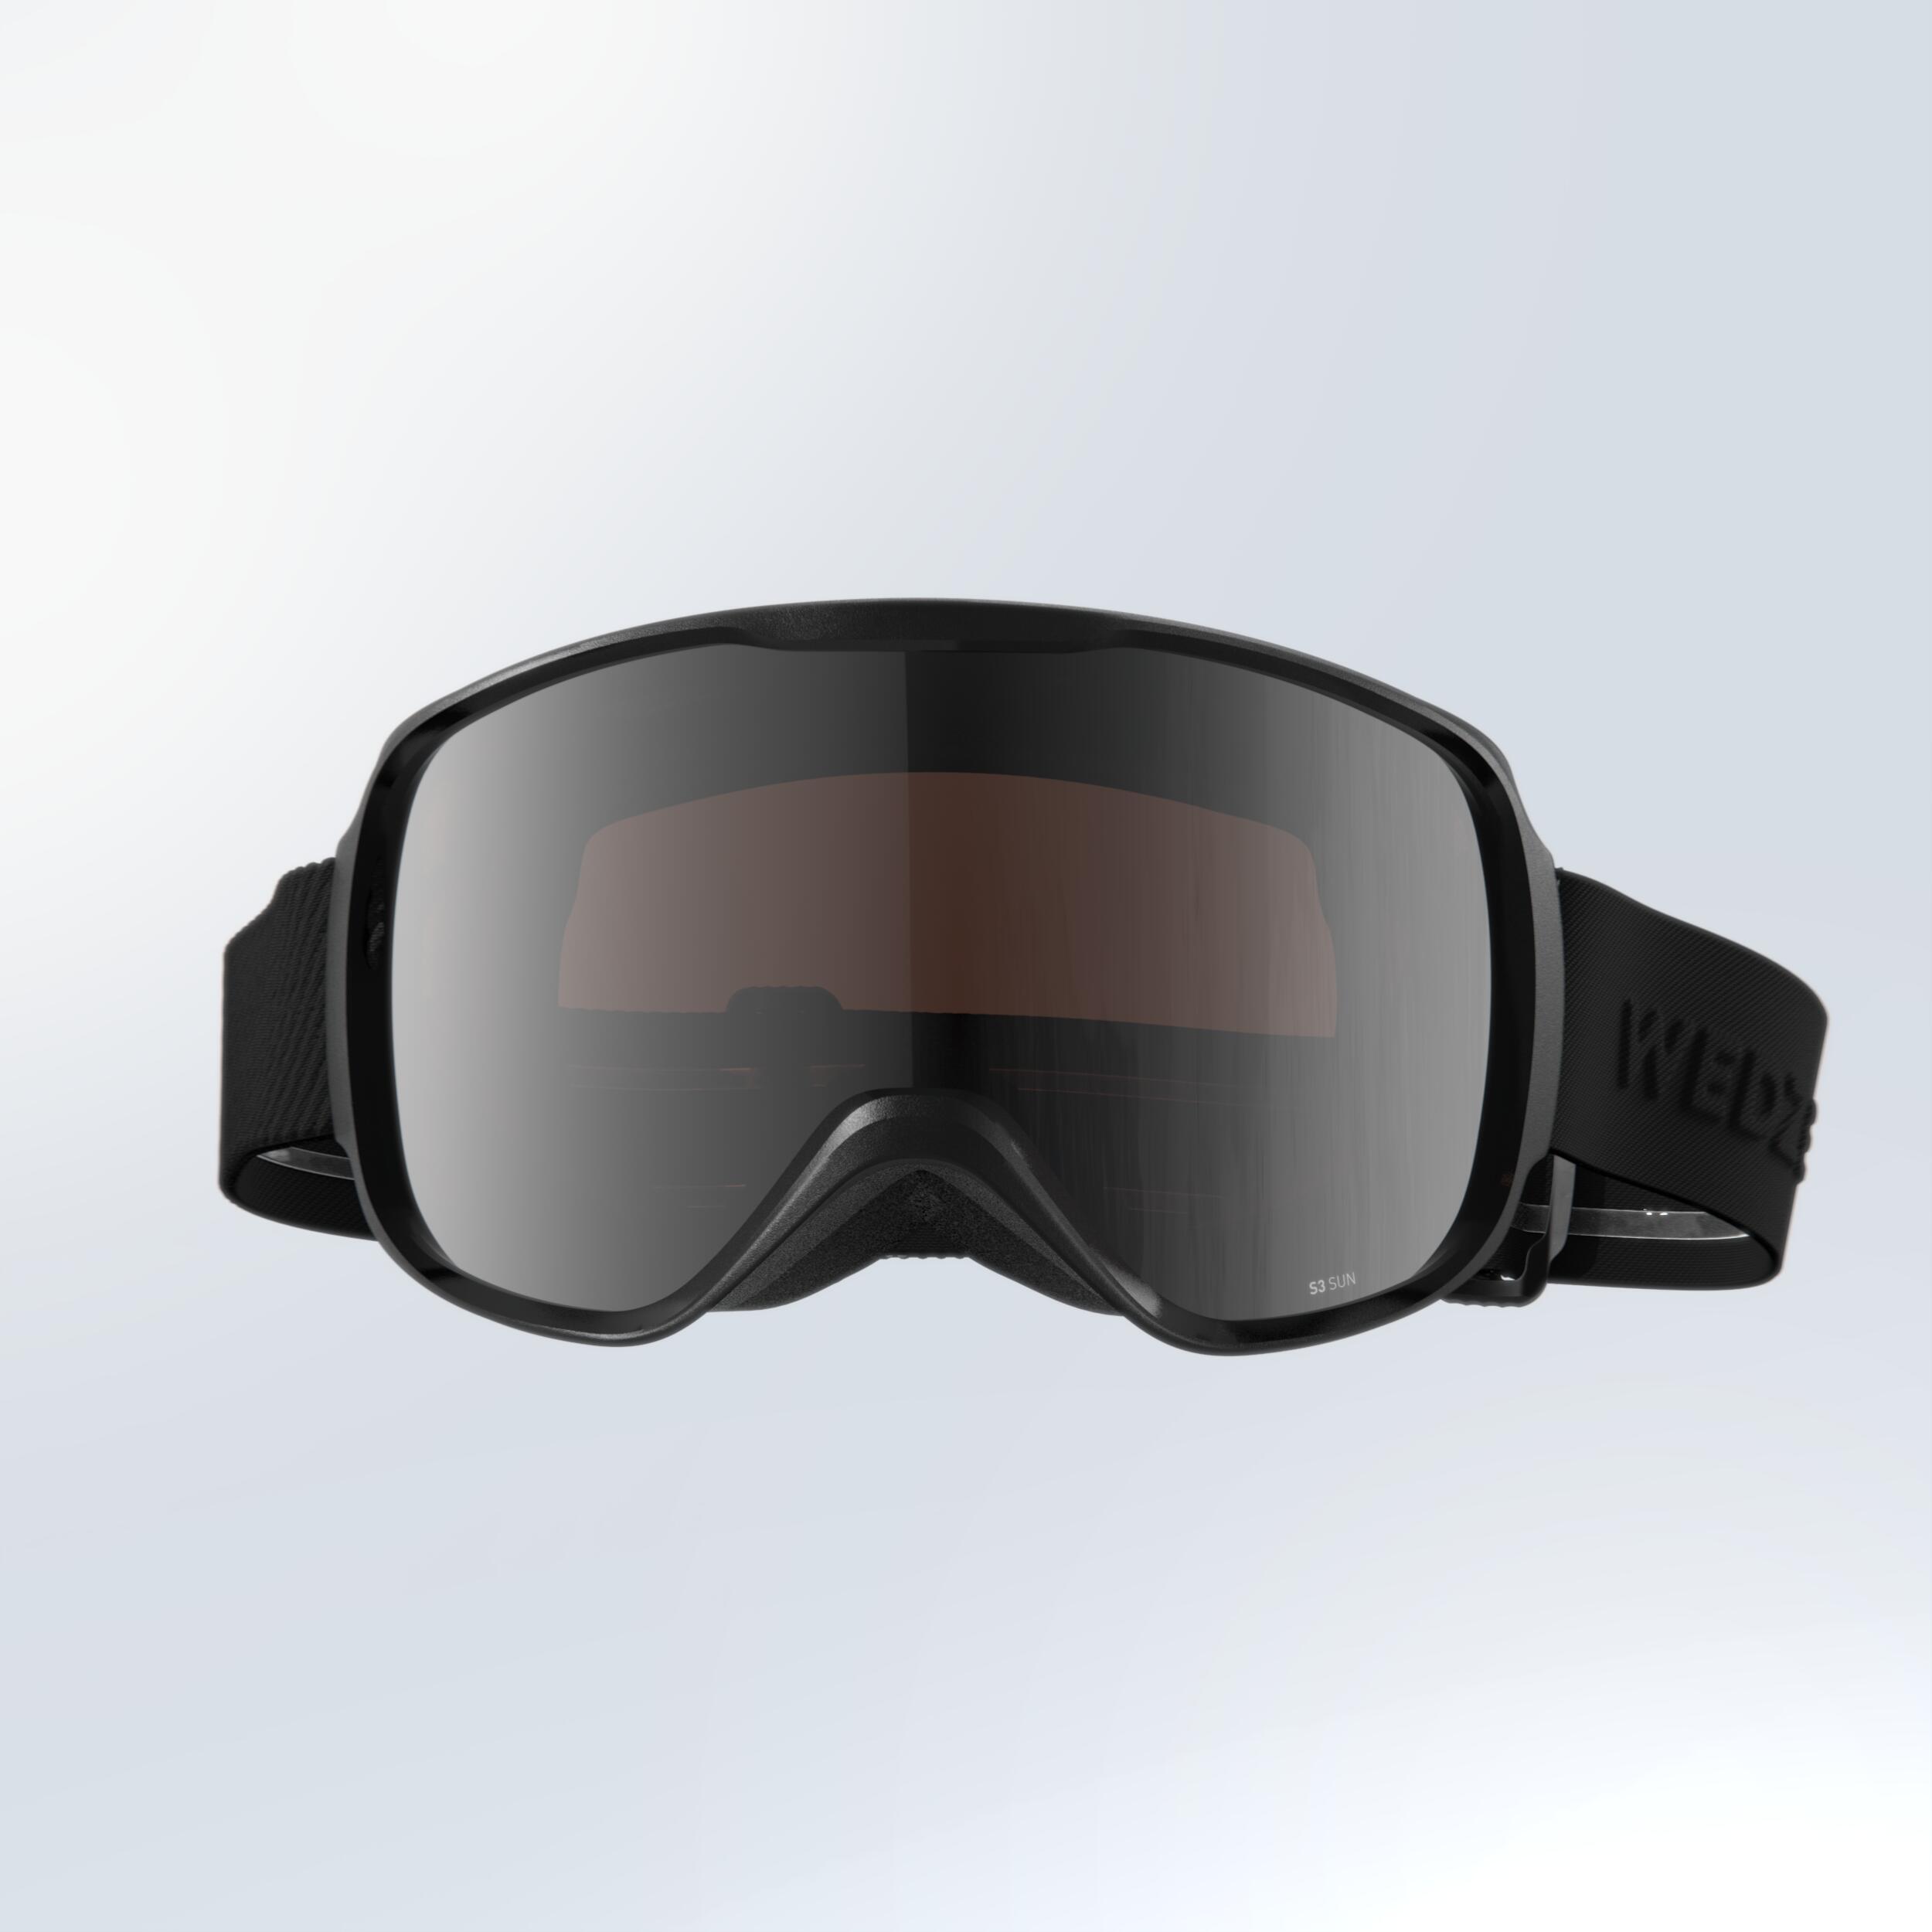 KIDS’ AND ADULT SKIING AND SNOWBOARDING GOGGLES GOOD WEATHER - G 500 S3 - BLACK 4/7